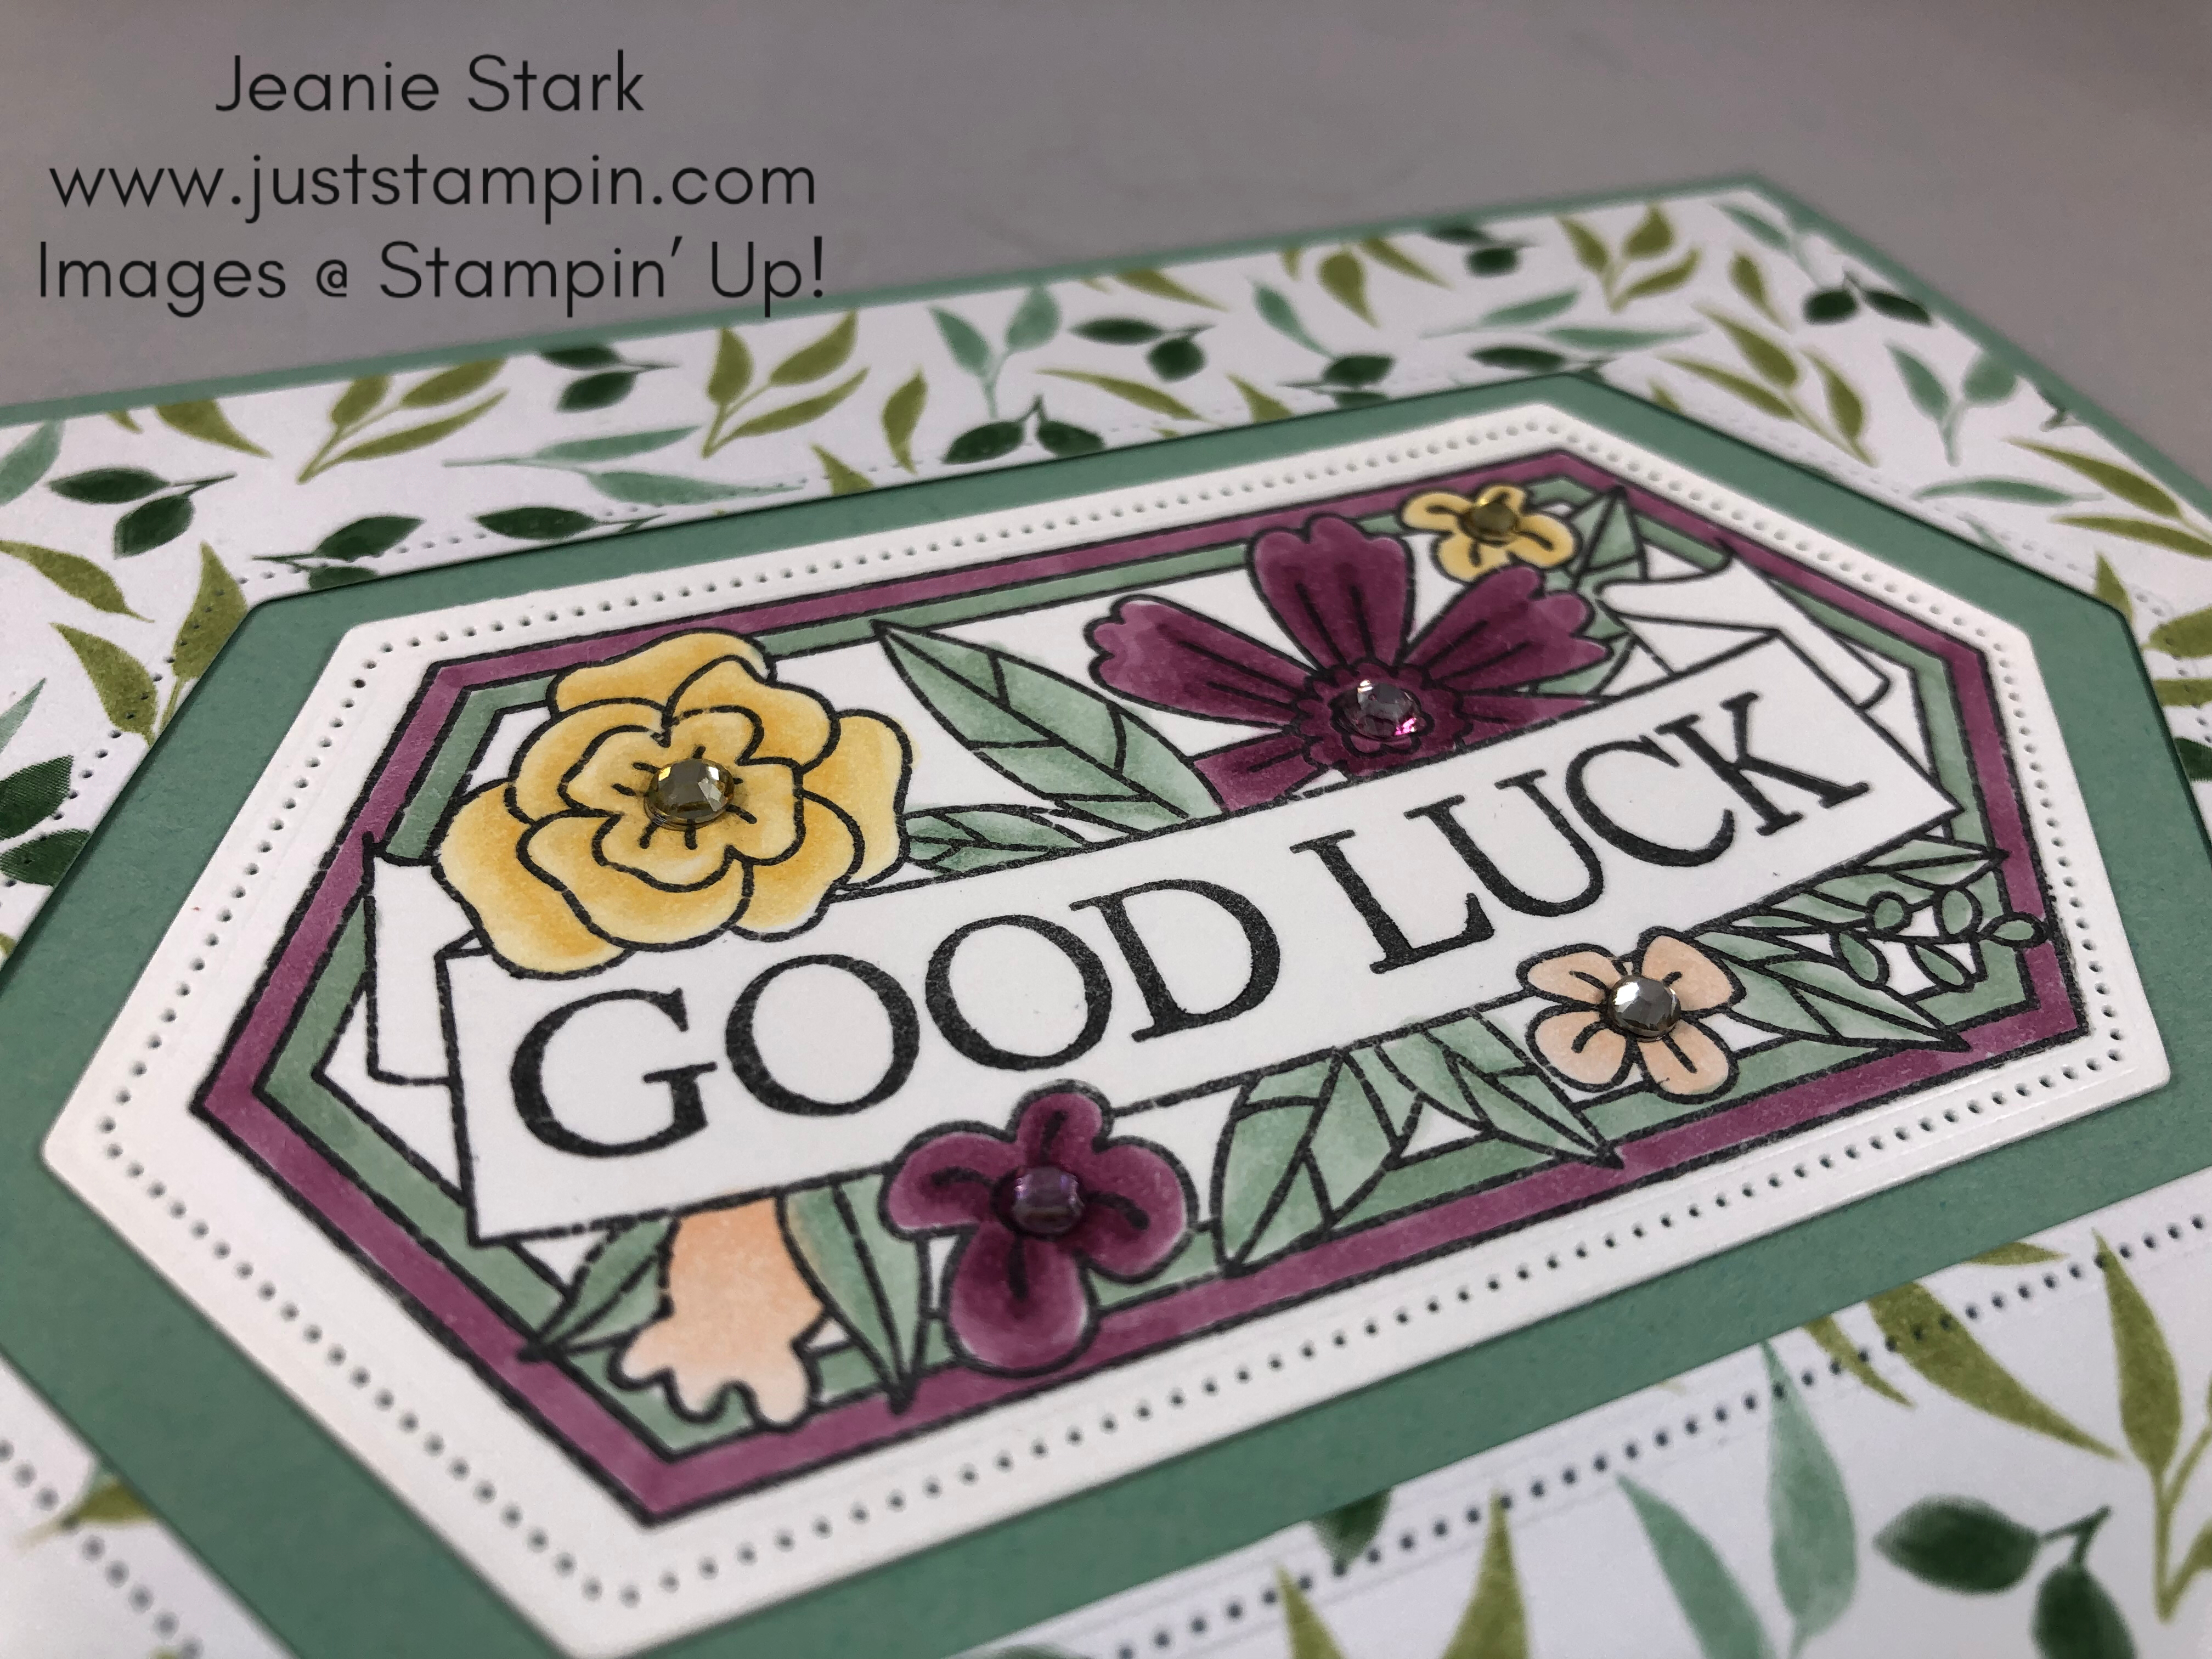 Stampin' Up! Believe You Can Good Luck card idea - Jeanie Stark StampinUp